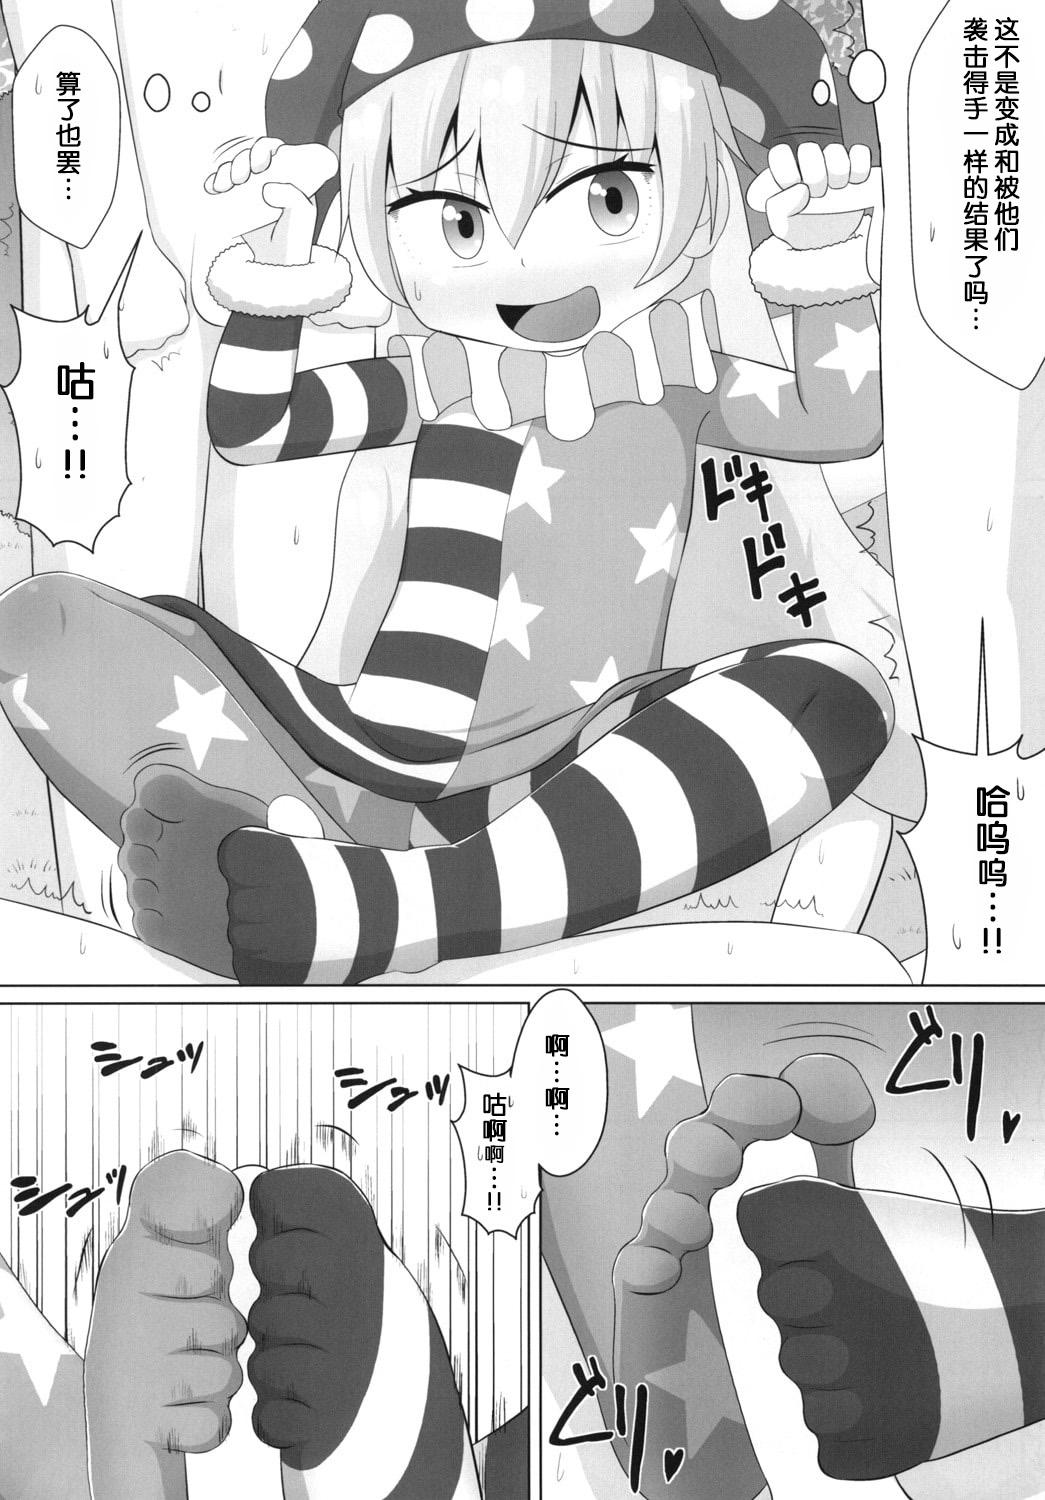 Exhibitionist Yousei no Itazura - Touhou project Bra - Page 9